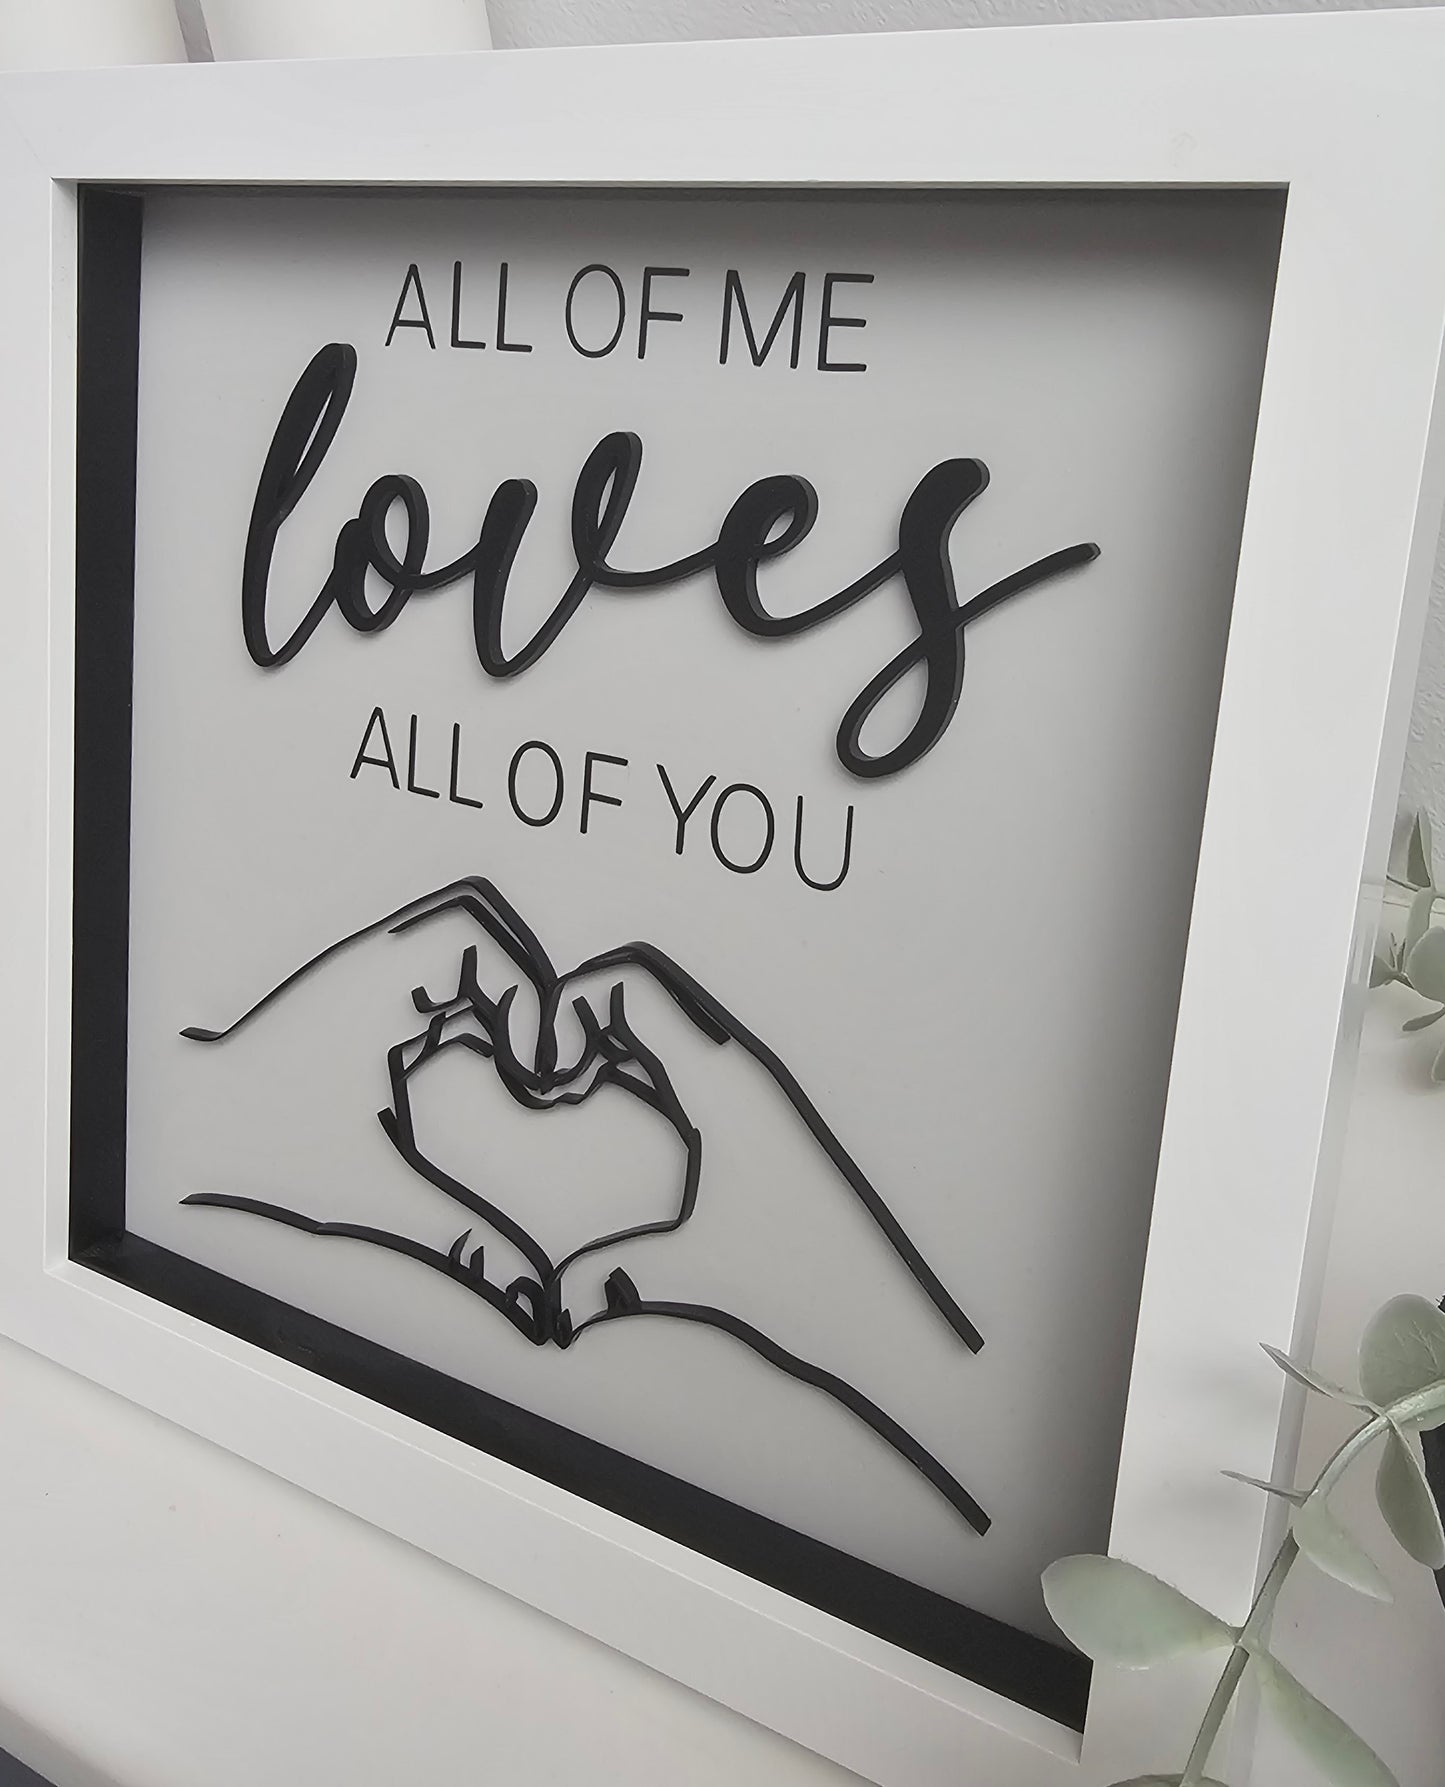 All of me loves all of you - Acrylic Framed Sign